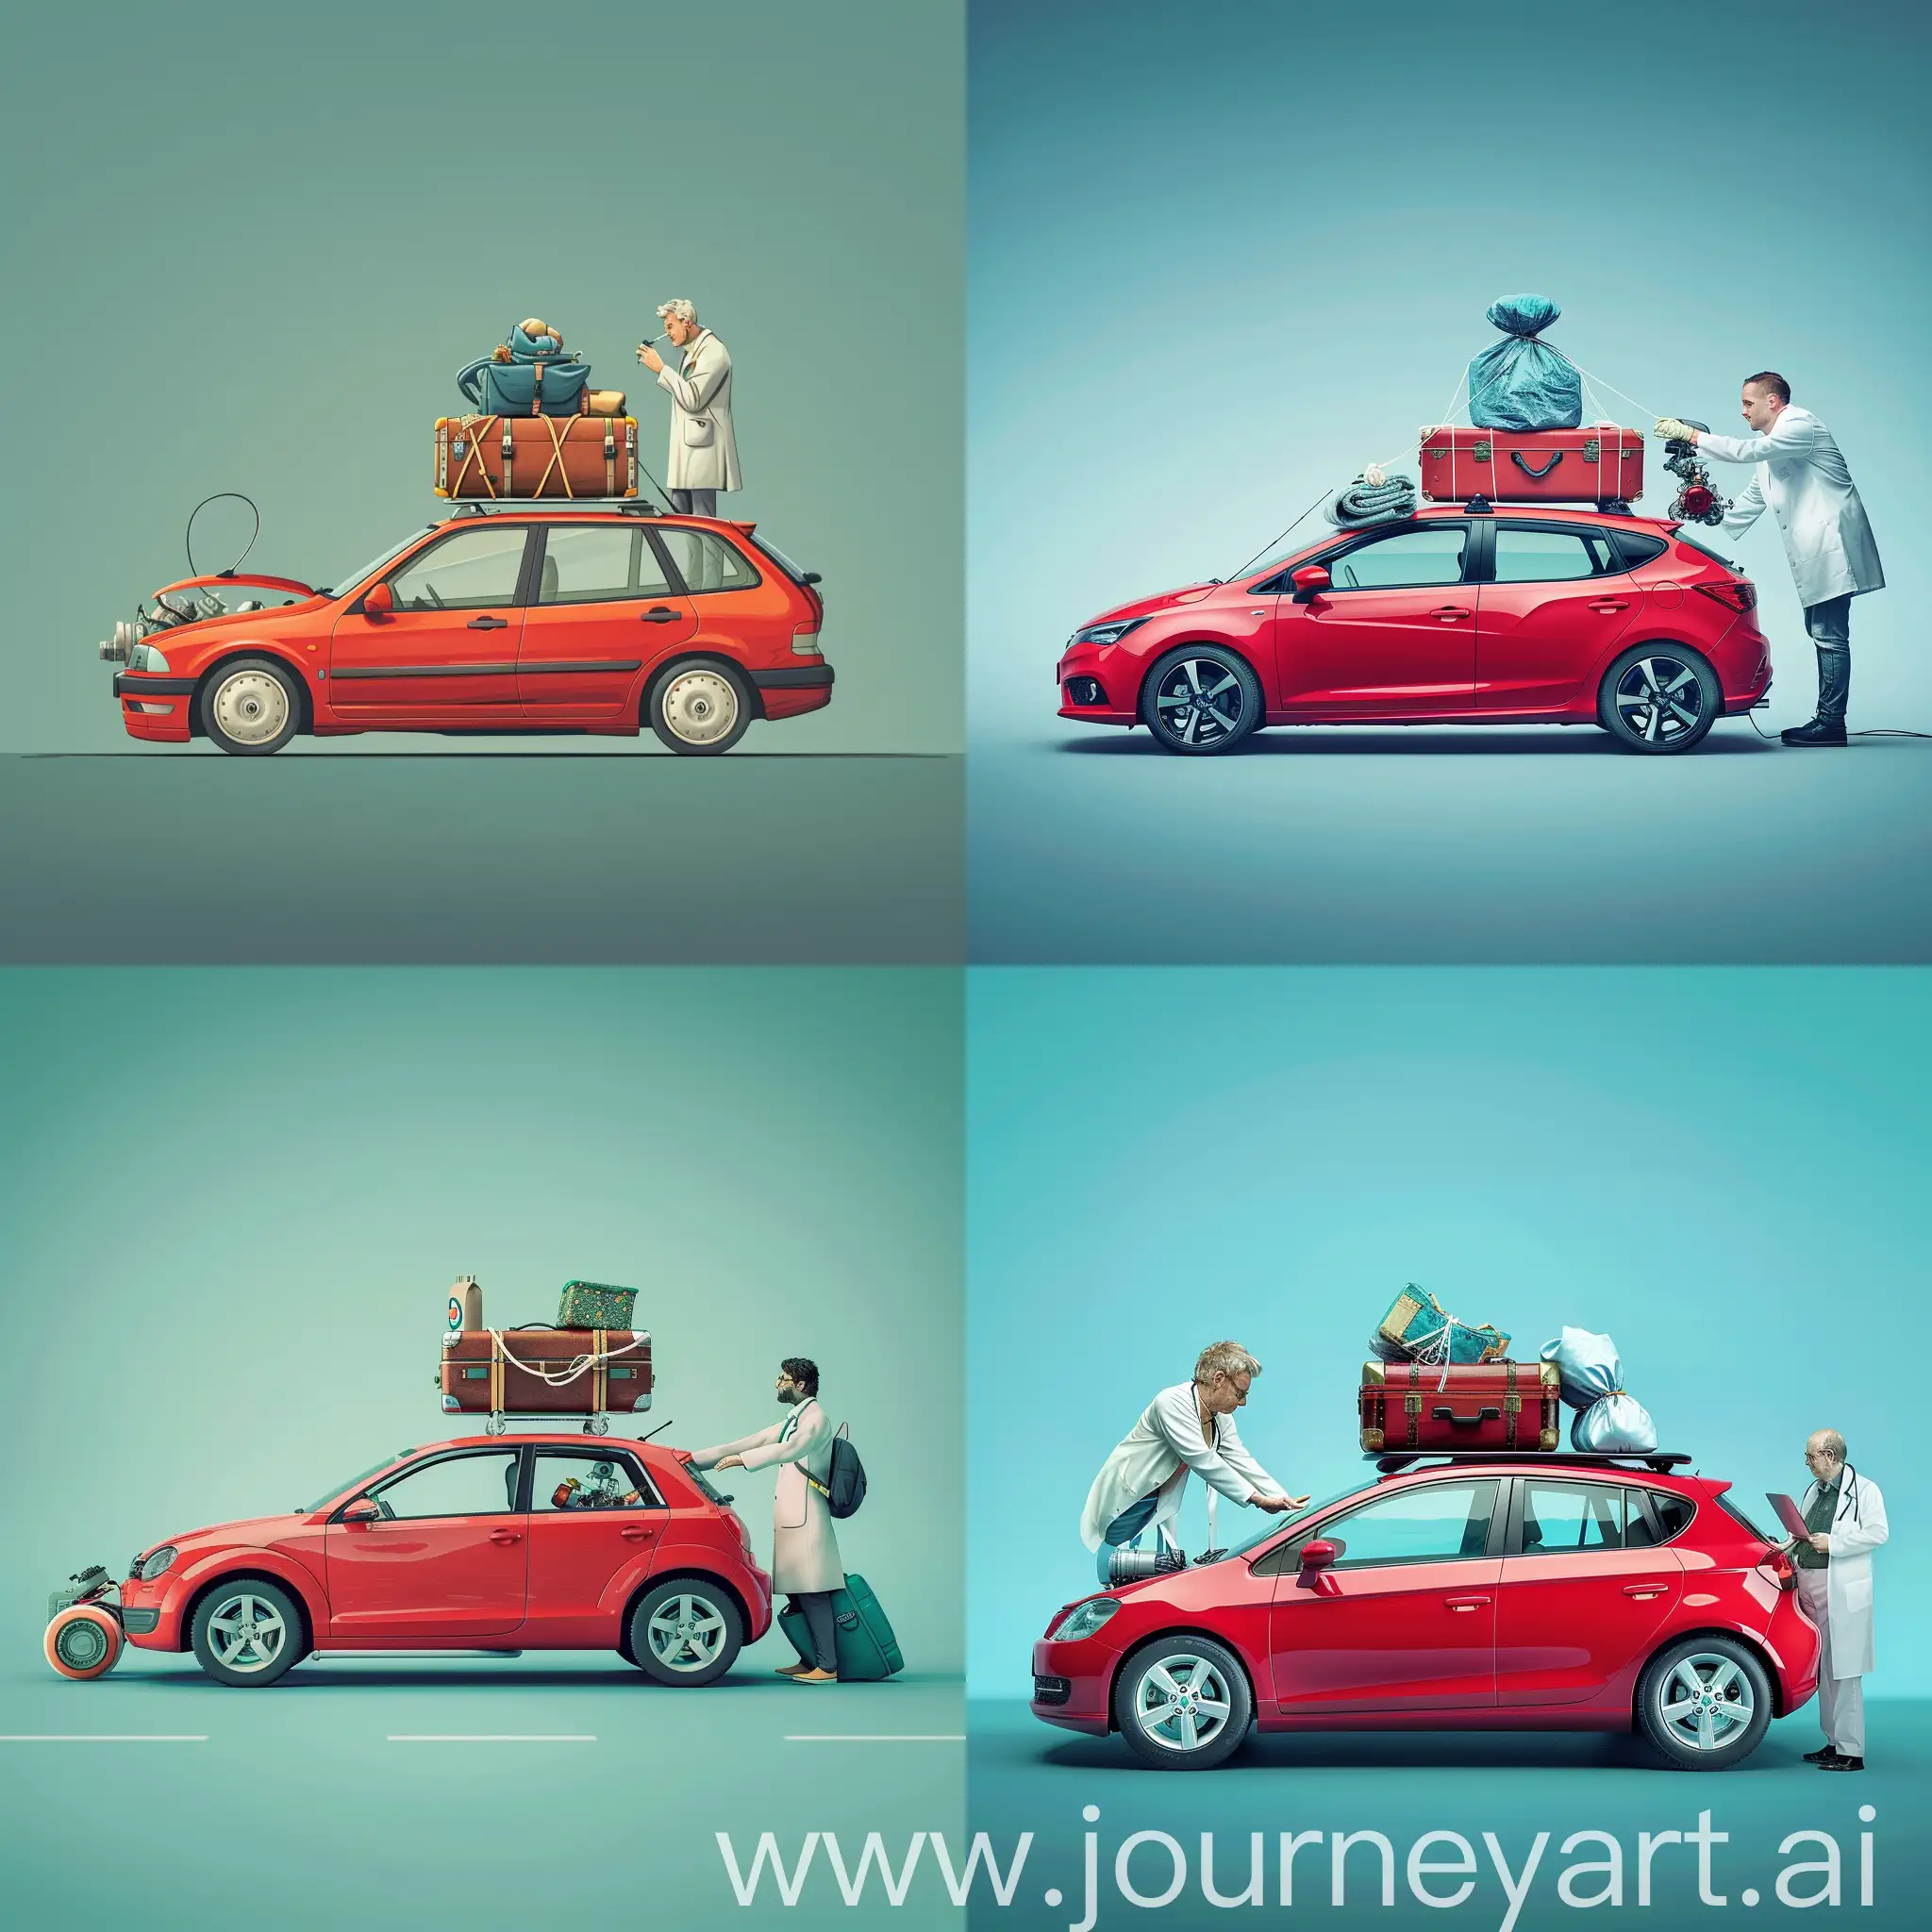 Red-Hatchback-Car-Packed-for-Travel-with-Doctor-Examining-Engine